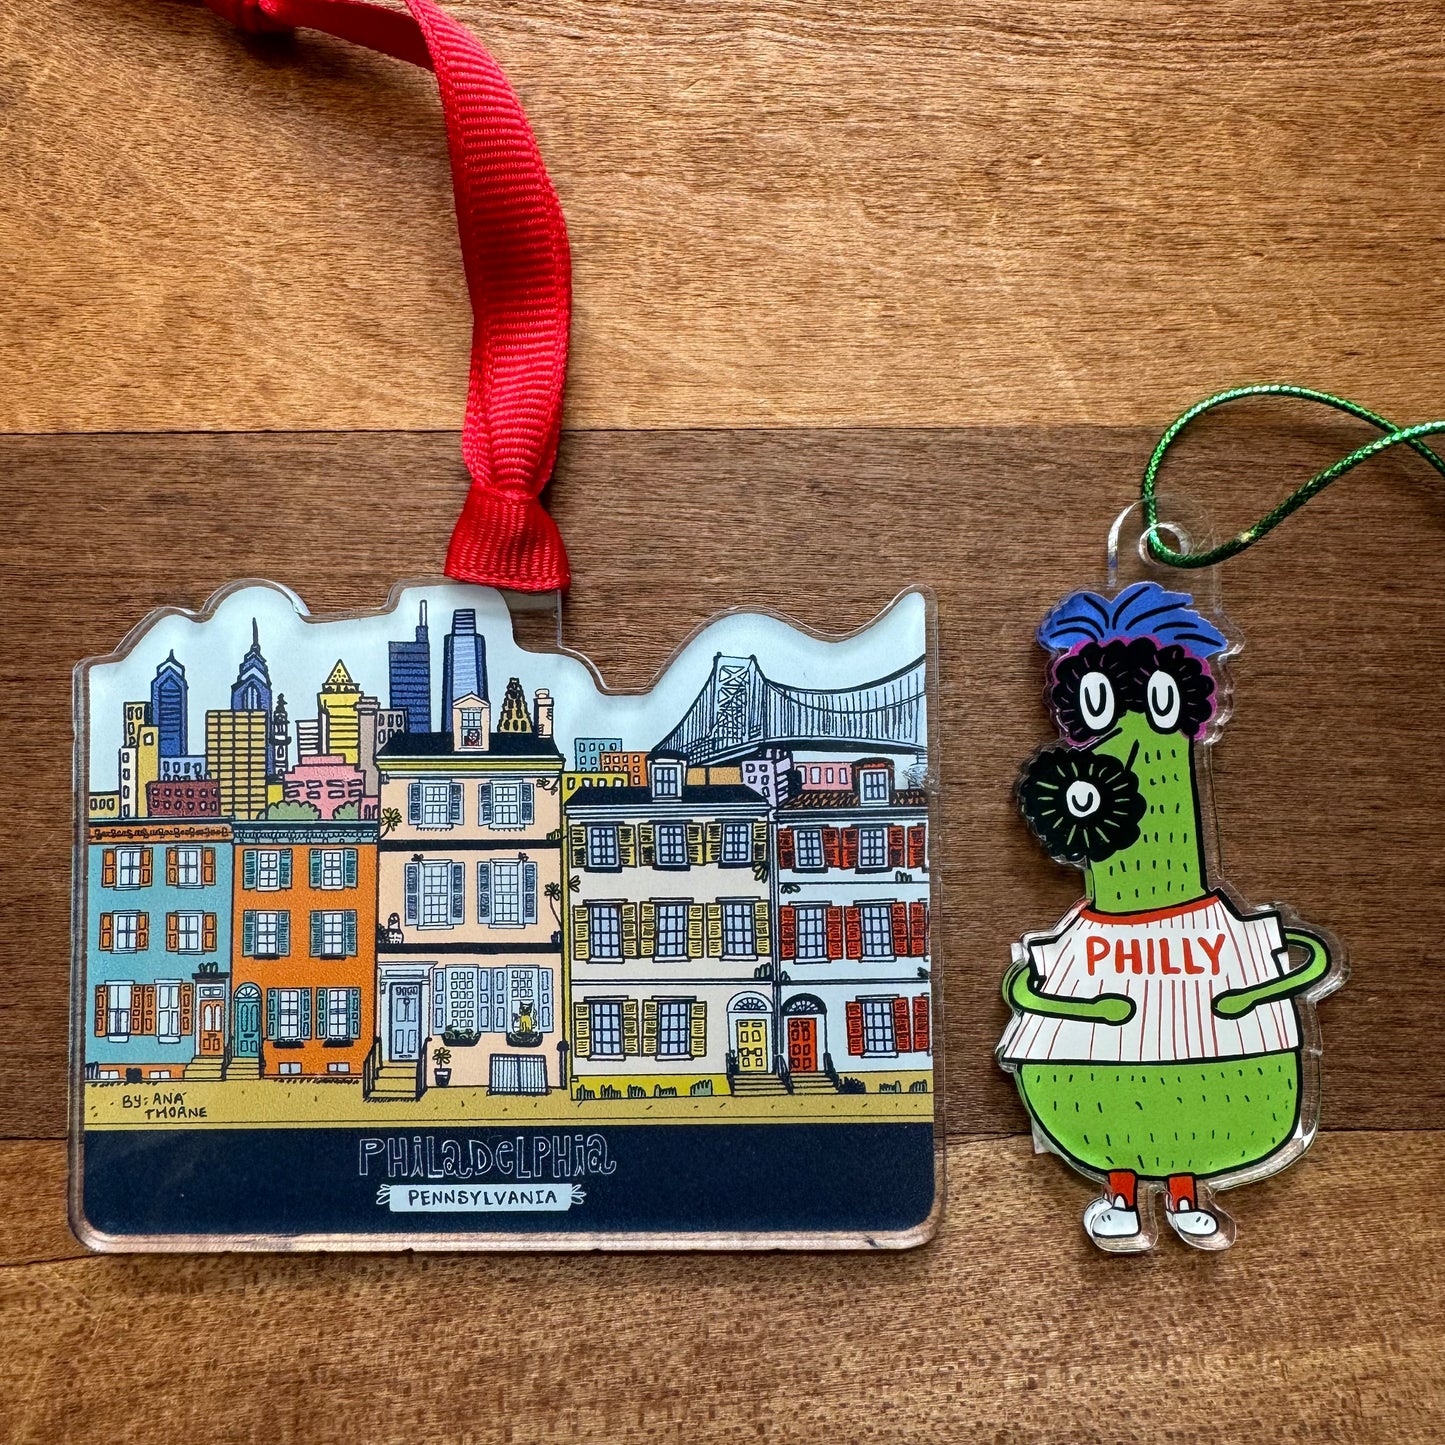 Two Philly Acrylic Ornaments from Ana Thorne: one features a colorful illustration of Philadelphia's skyline and landmarks, while the other showcases a green character wearing a "Philly" baseball shirt, embodying true Philly pride. Both lie on a wooden surface, capturing the essence of Philly Rowhome charm.